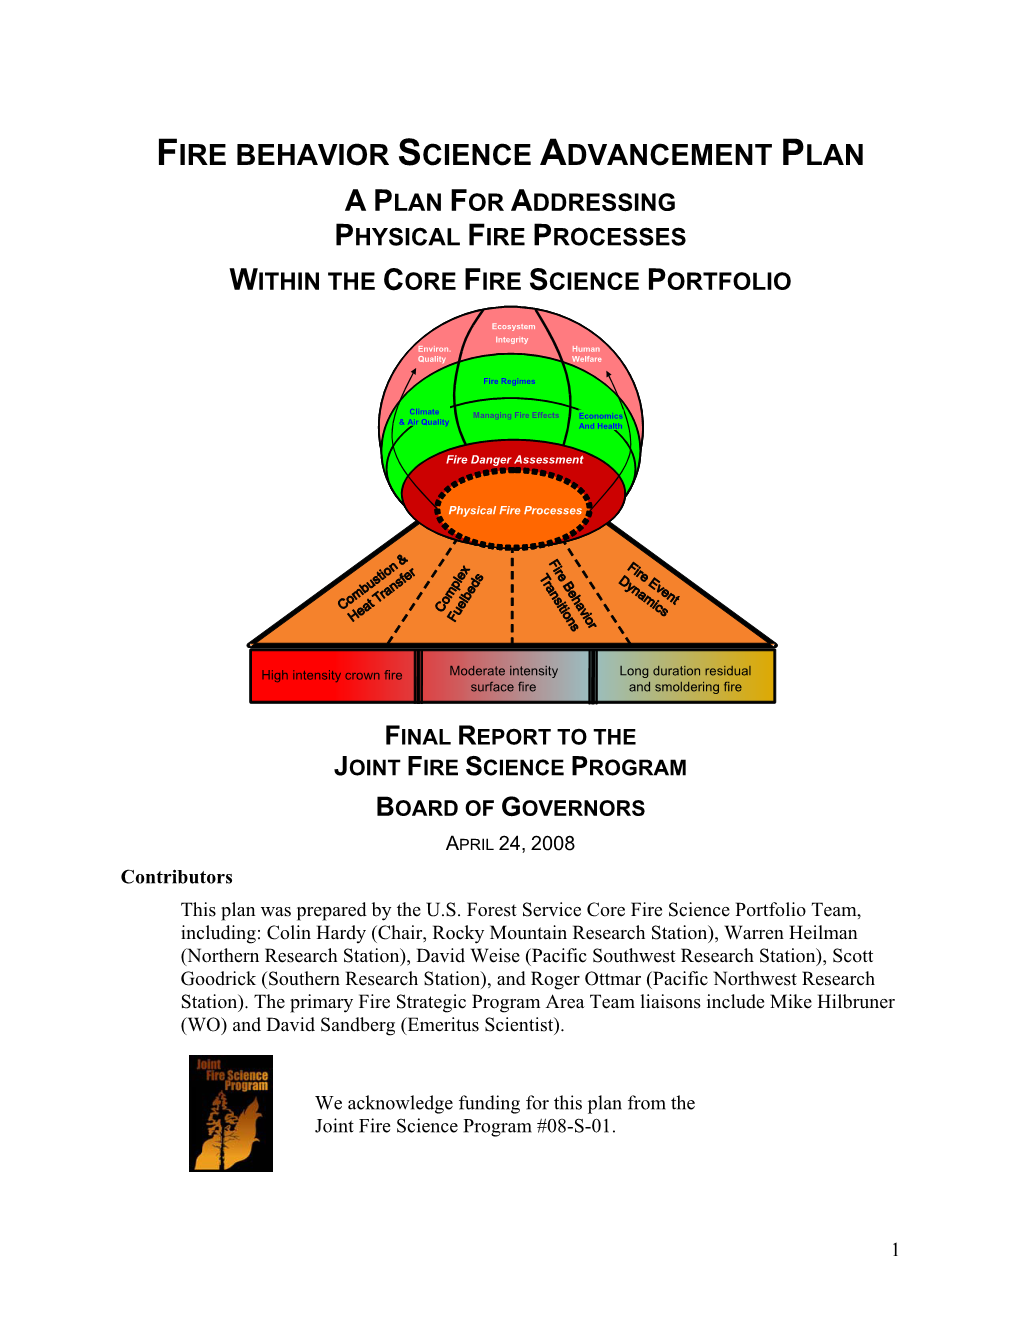 Fire Behavior Science Advancement Plan a Plan for Addressing Physical Fire Processes Within the Core Fire Science Portfolio